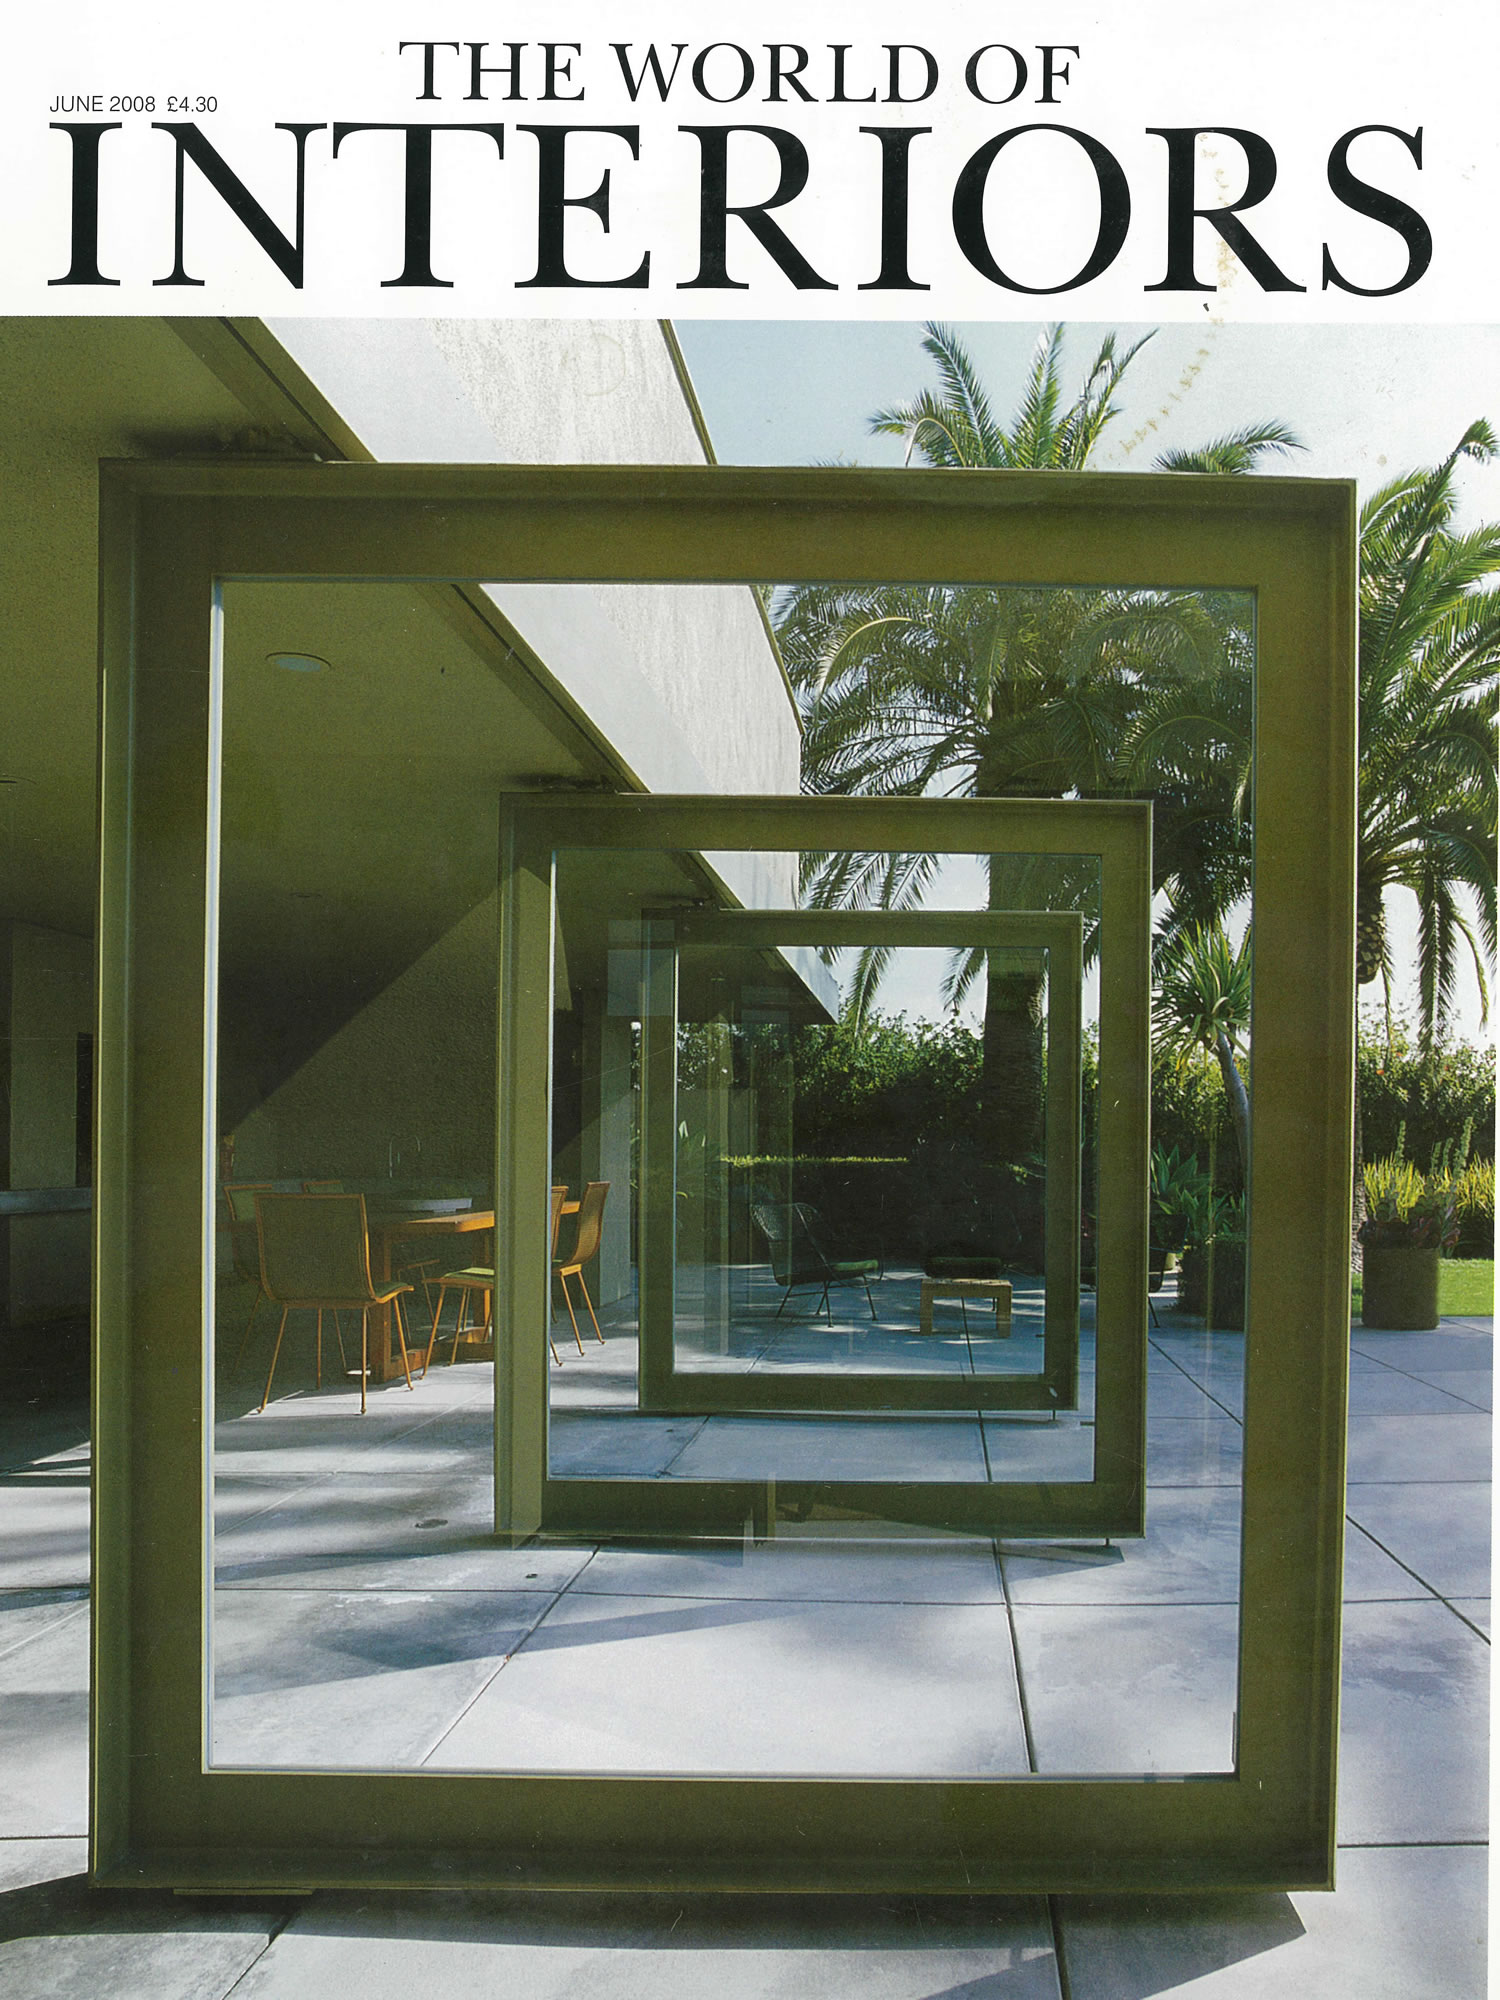 The World of Interiors FP June 2008